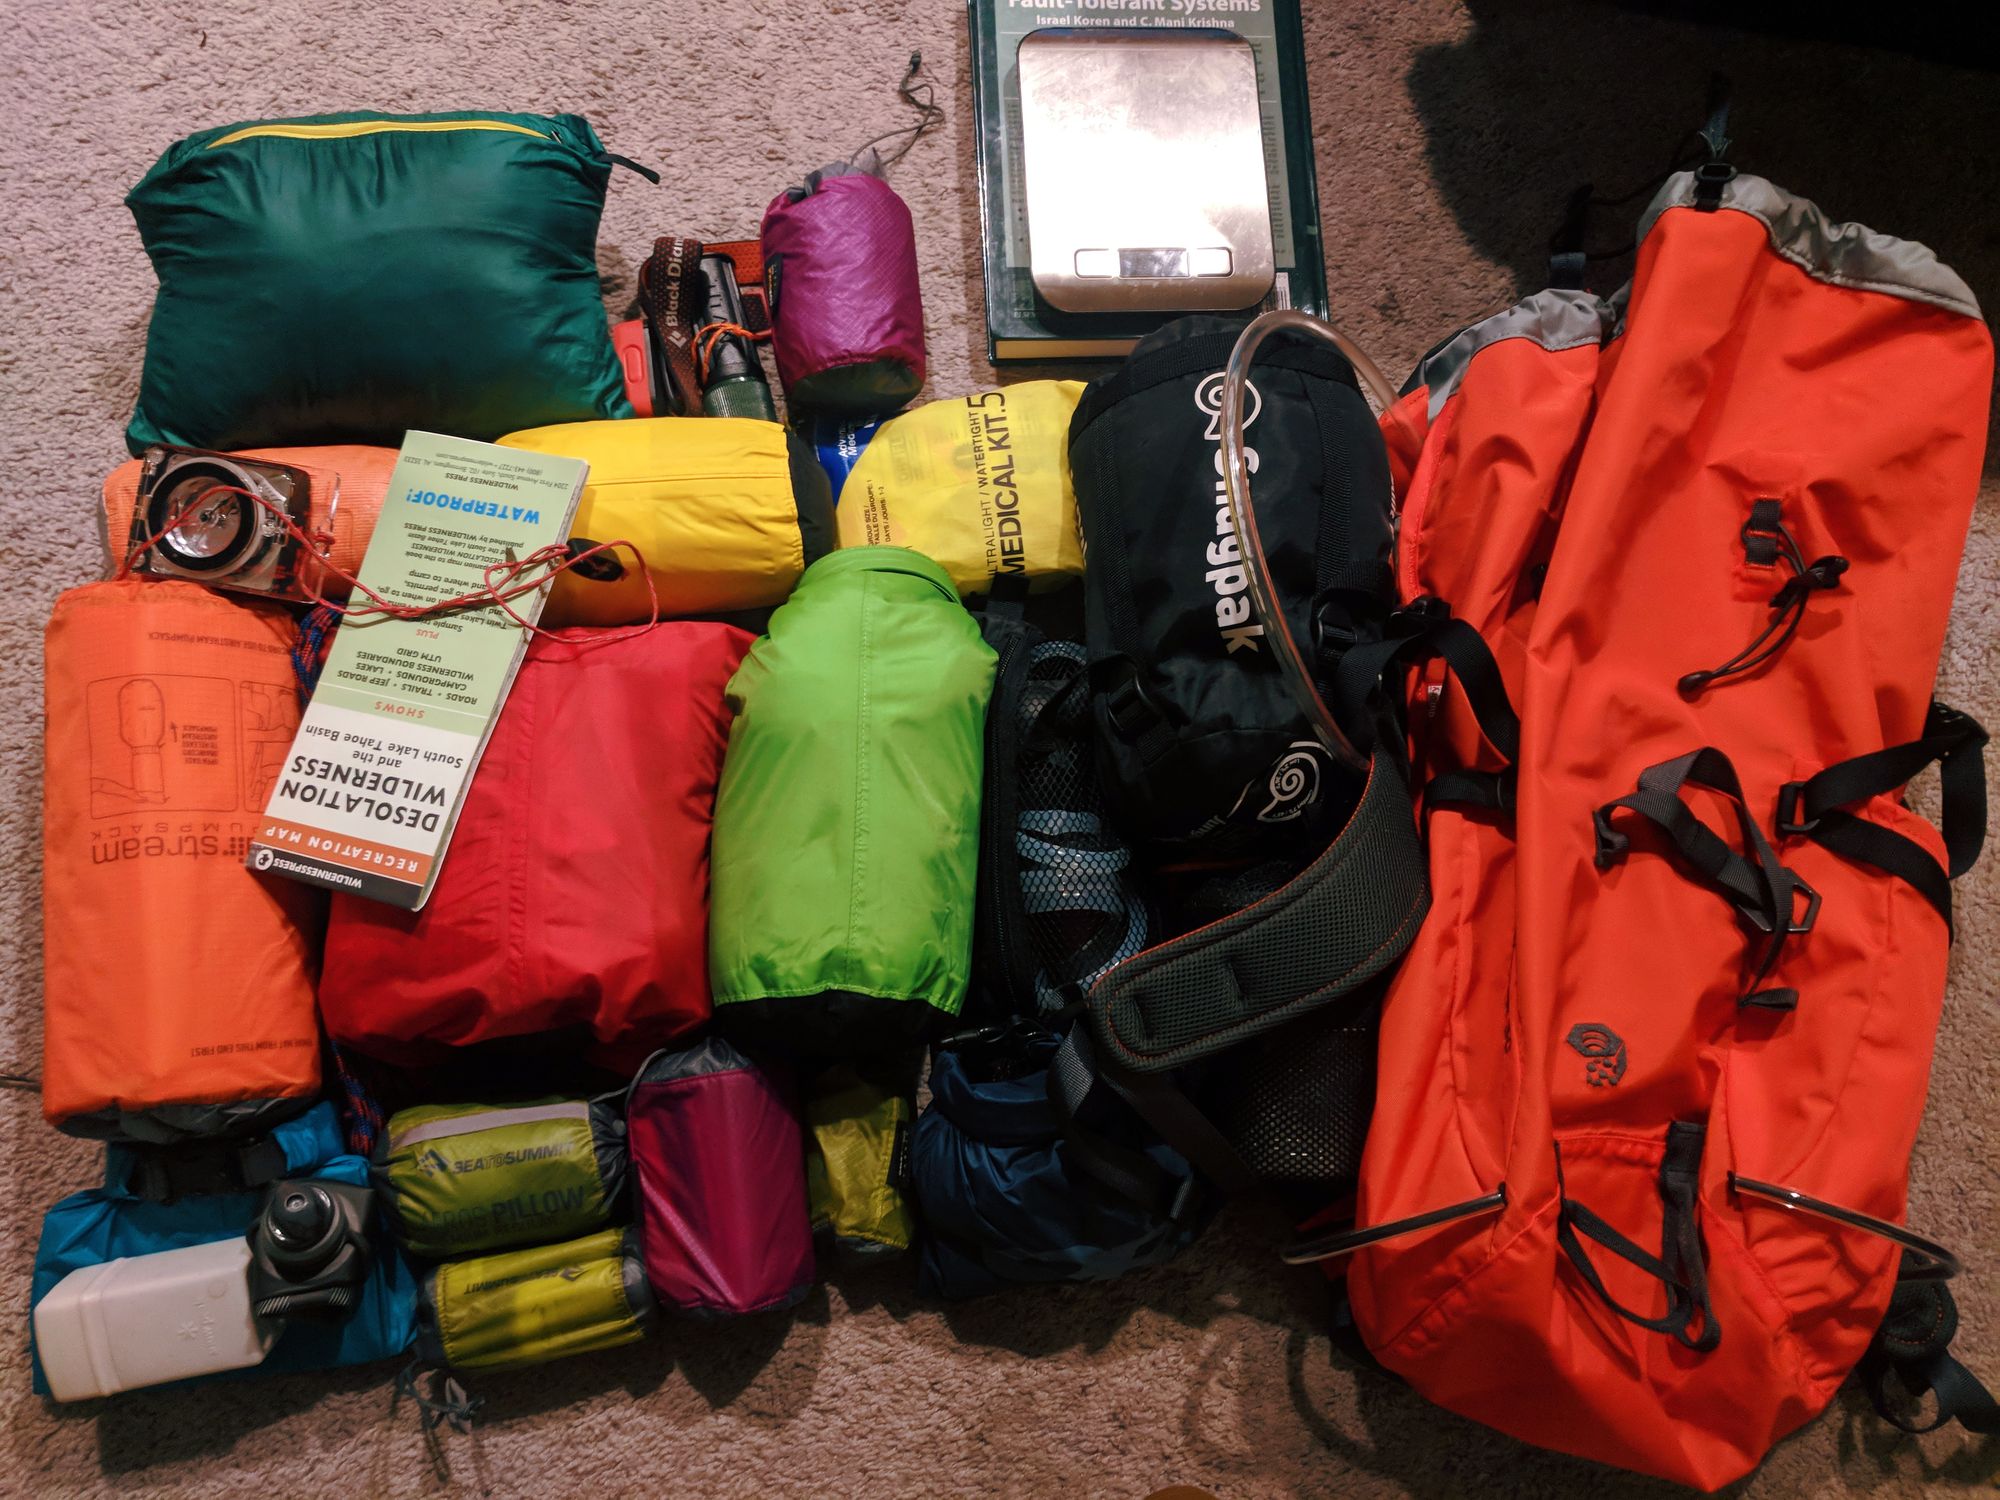 Some Notes on Ultralight Packing